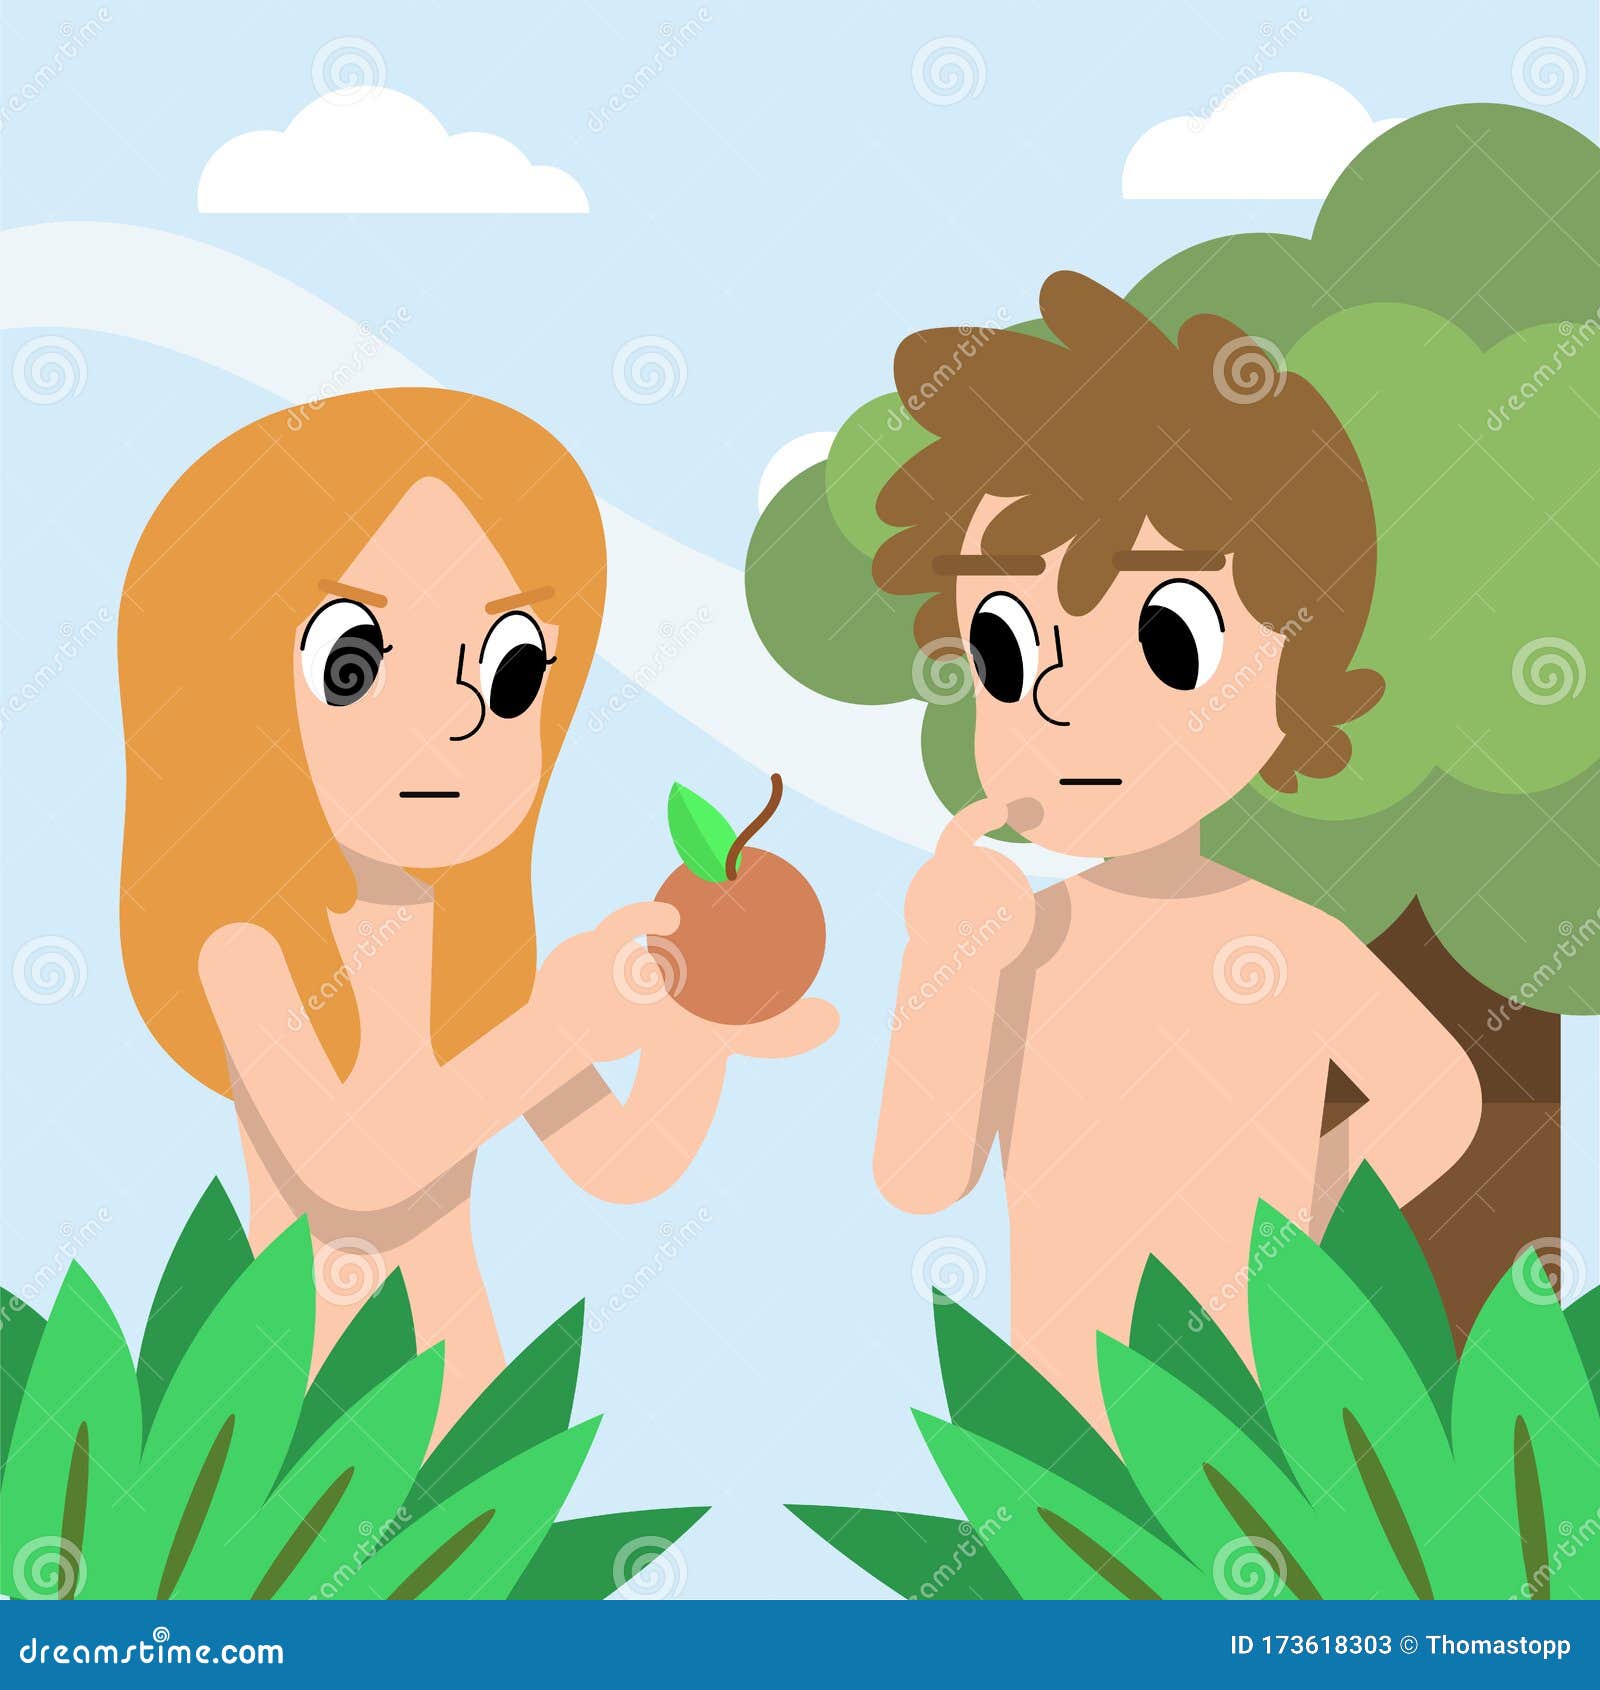 Adam And Eve In The Eden Stock Illustration - Image: 52870733